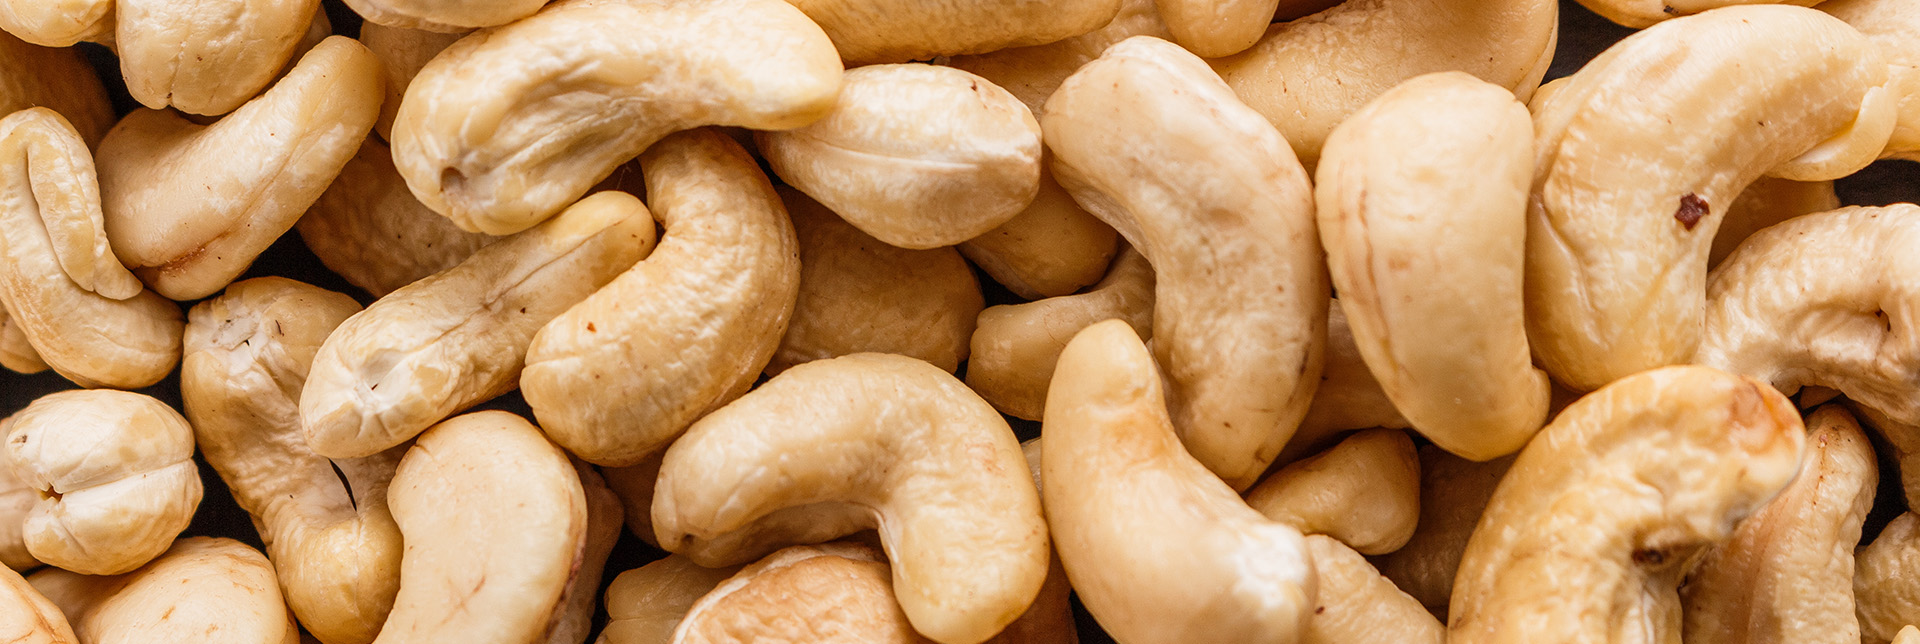 Raw Cashew Nuts for sell.